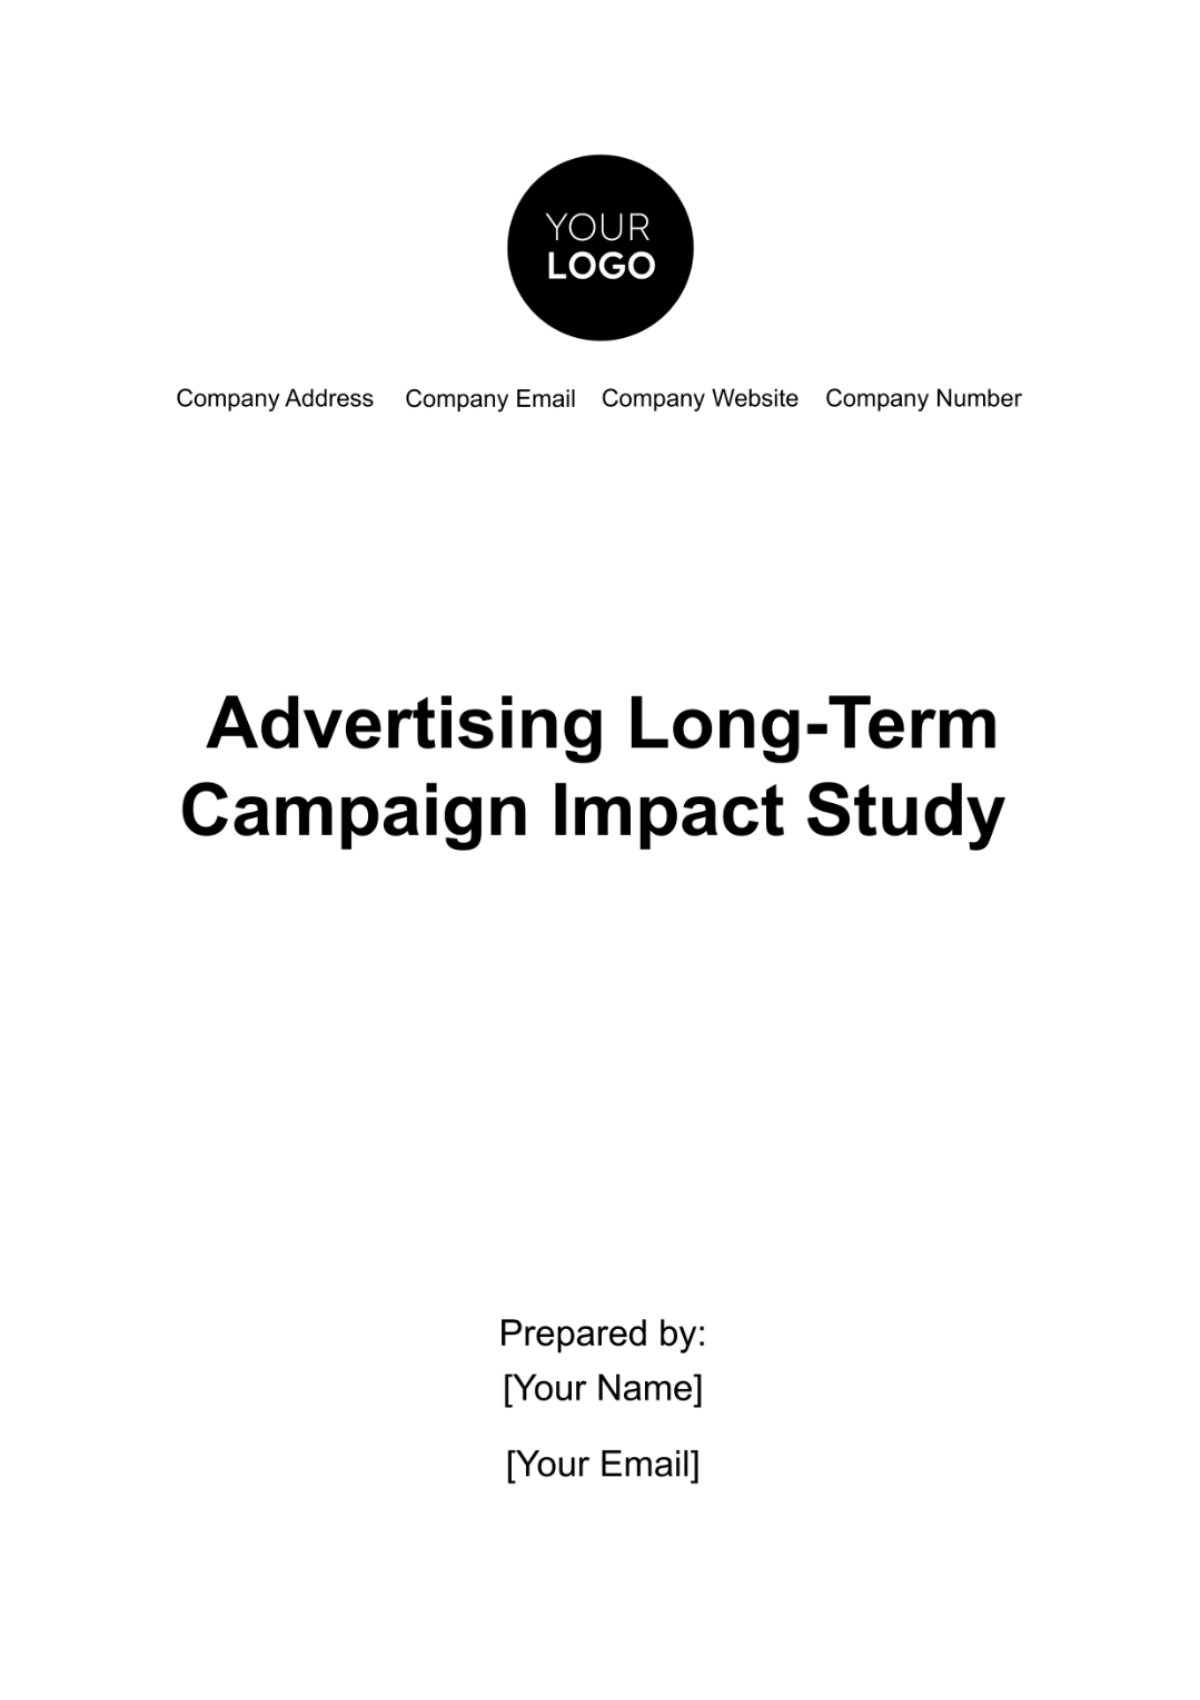 Free Advertising Long-Term Campaign Impact Study Template